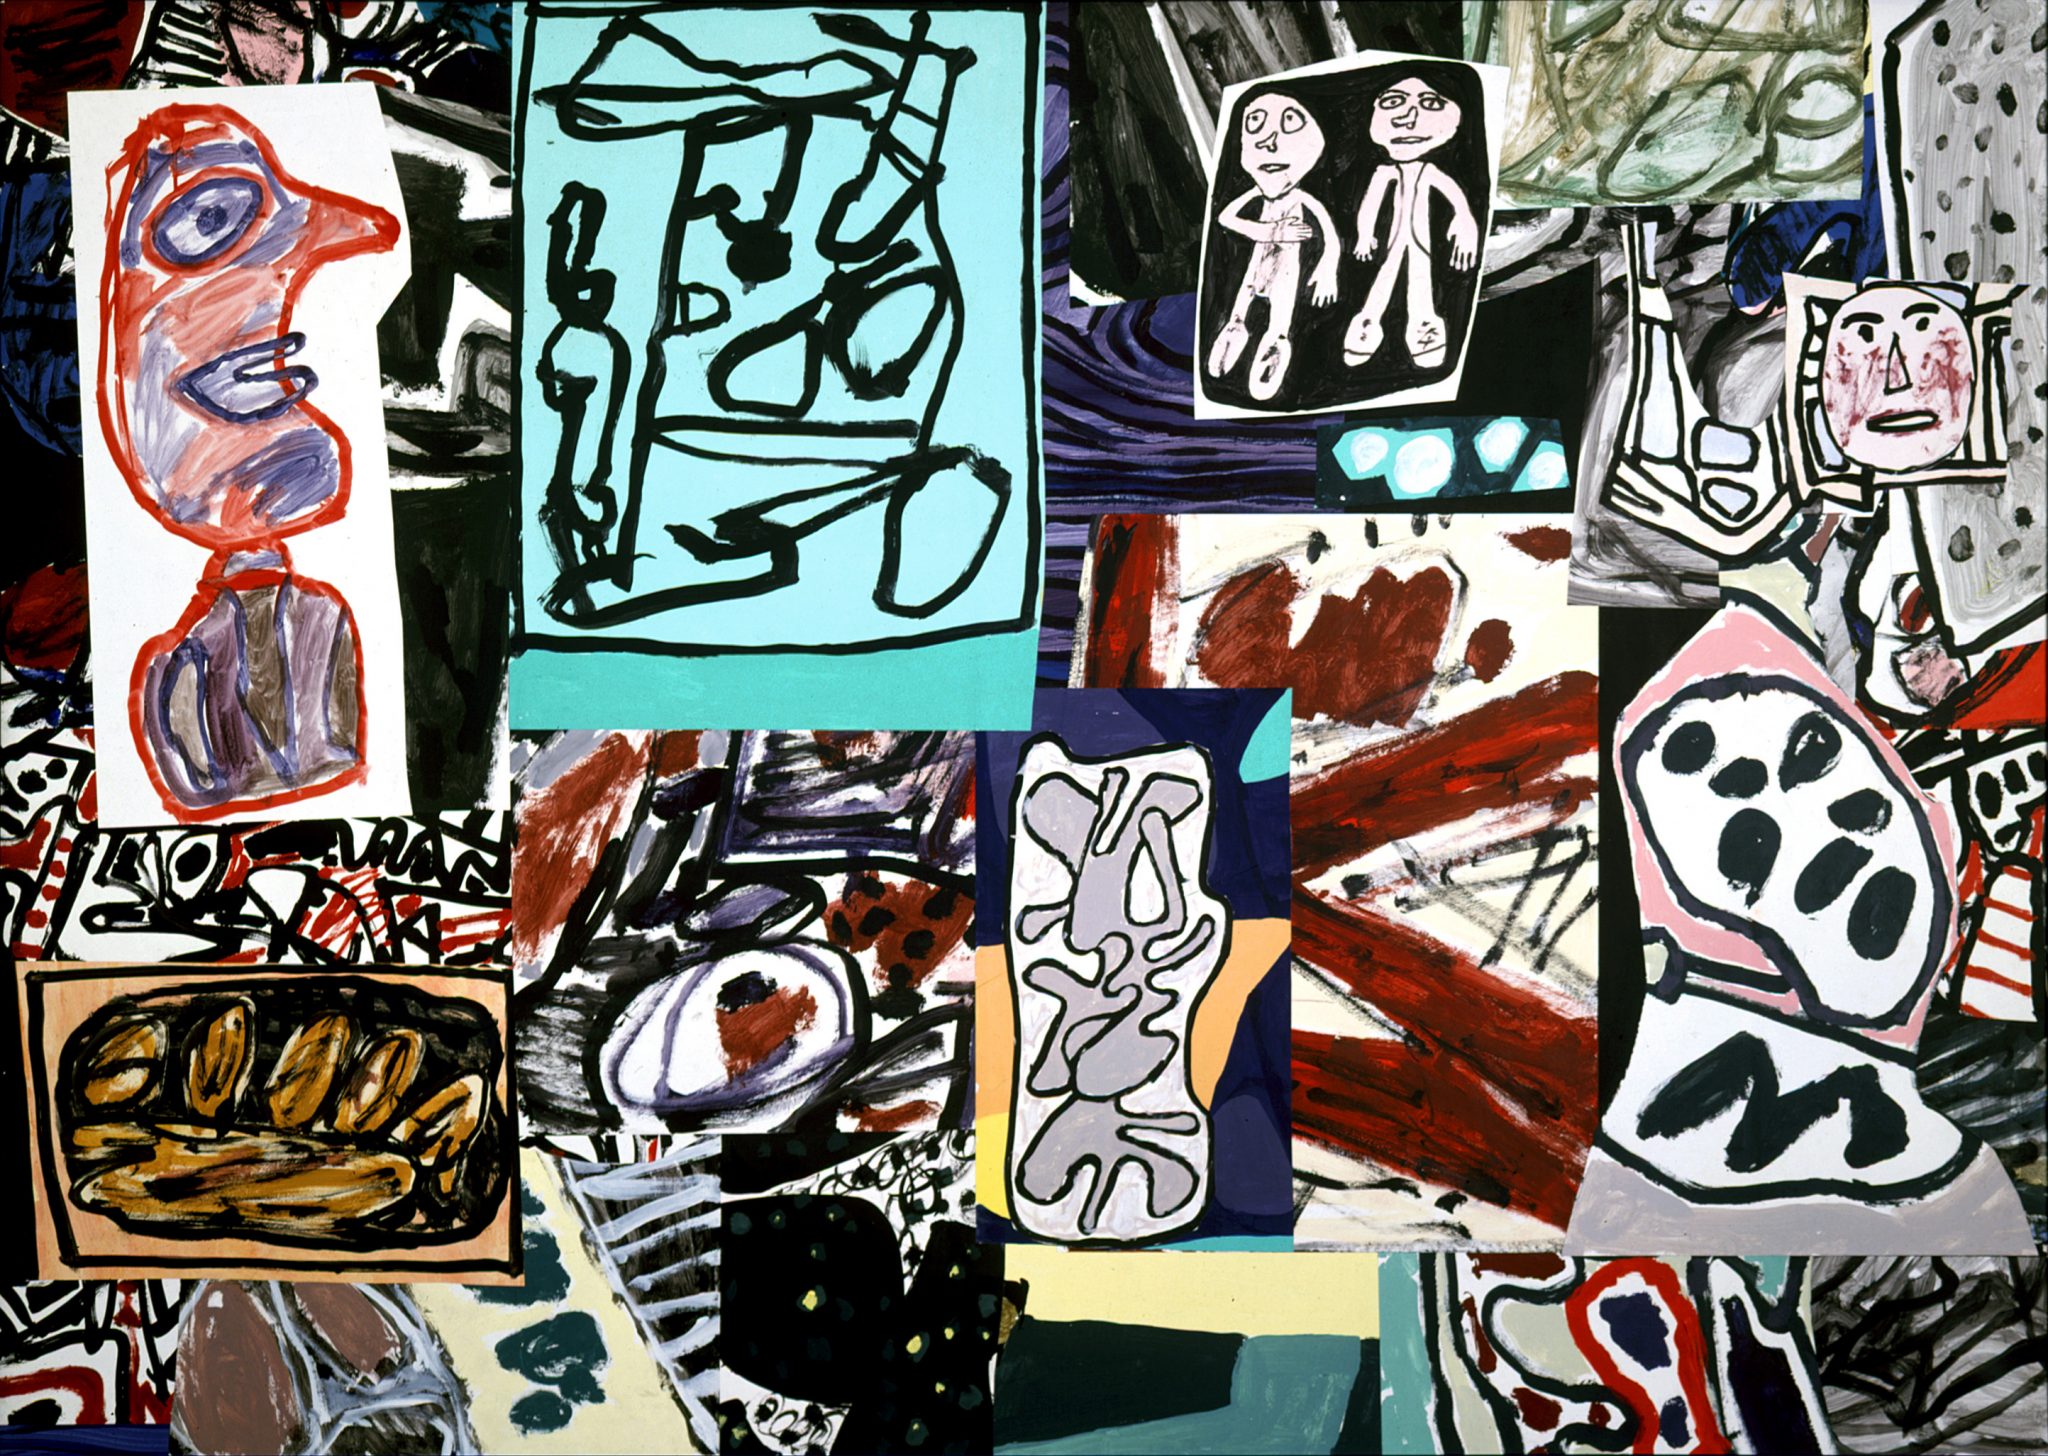 Jean Dubuffet Les données de I'instant, September 8, 1977 acrylic on glued paper mounted on canvas (31 sections) FAD magazine 